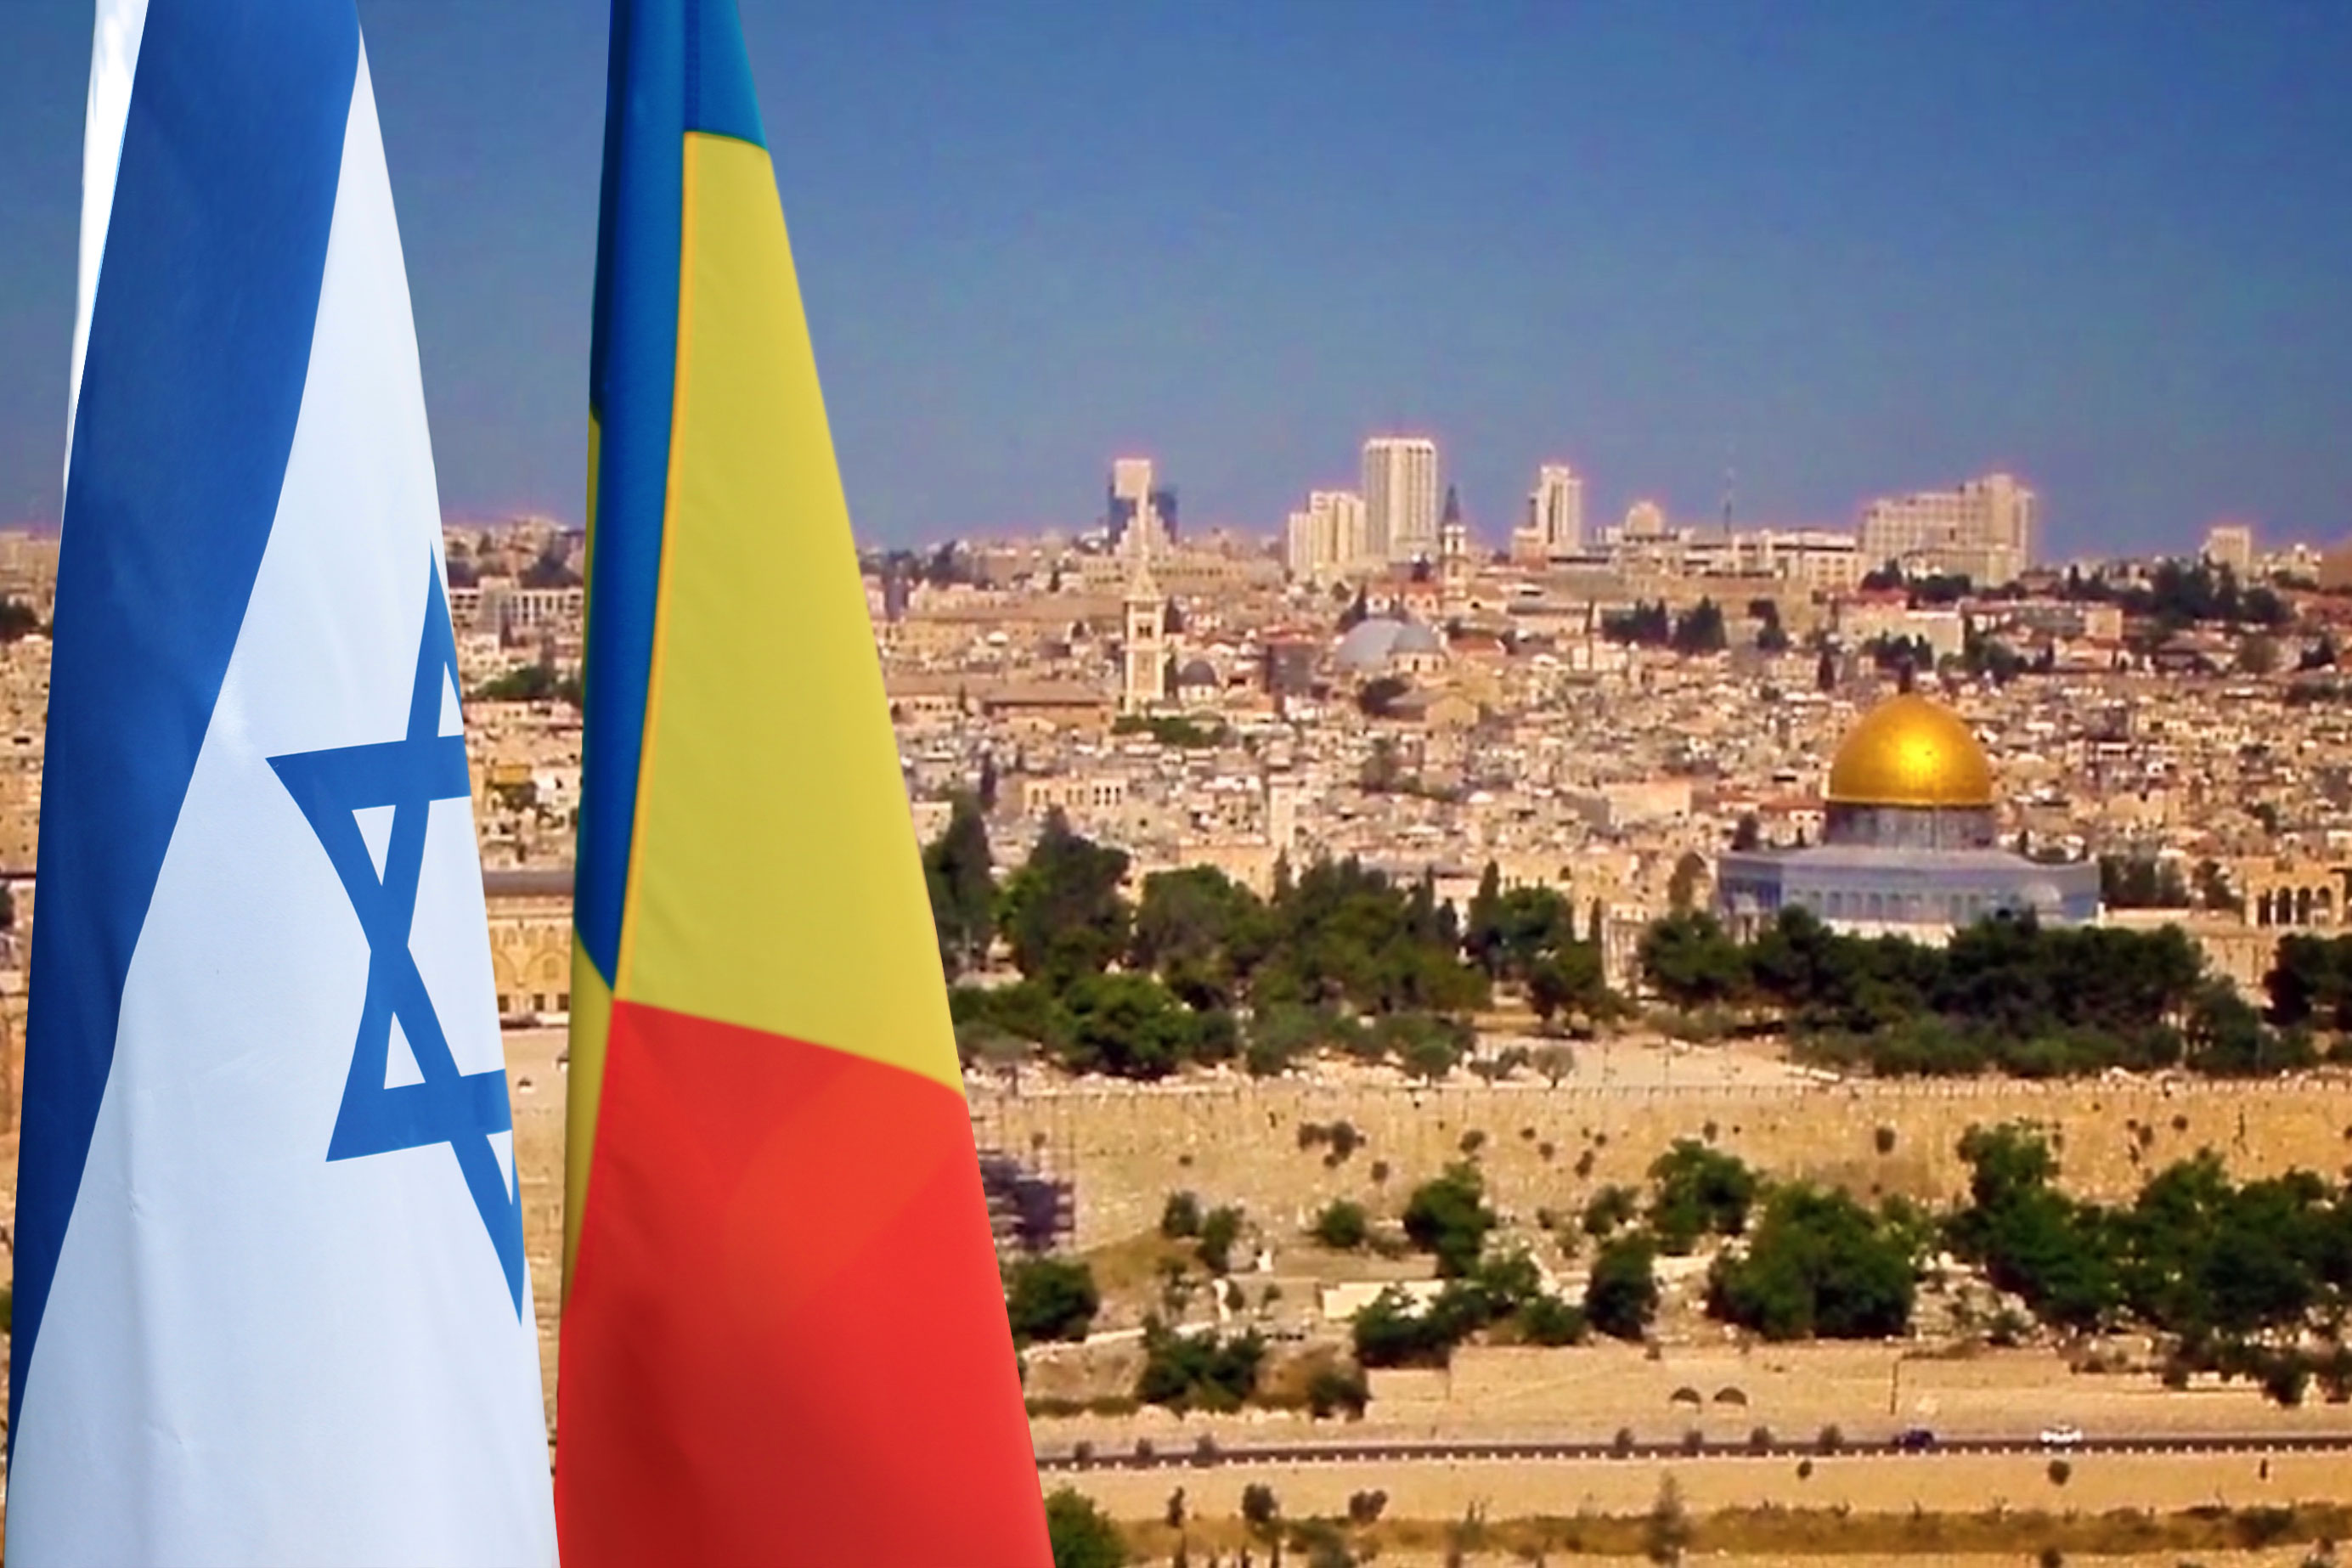 Romania to relocate its embassy from Tel Aviv to Jerusalem.